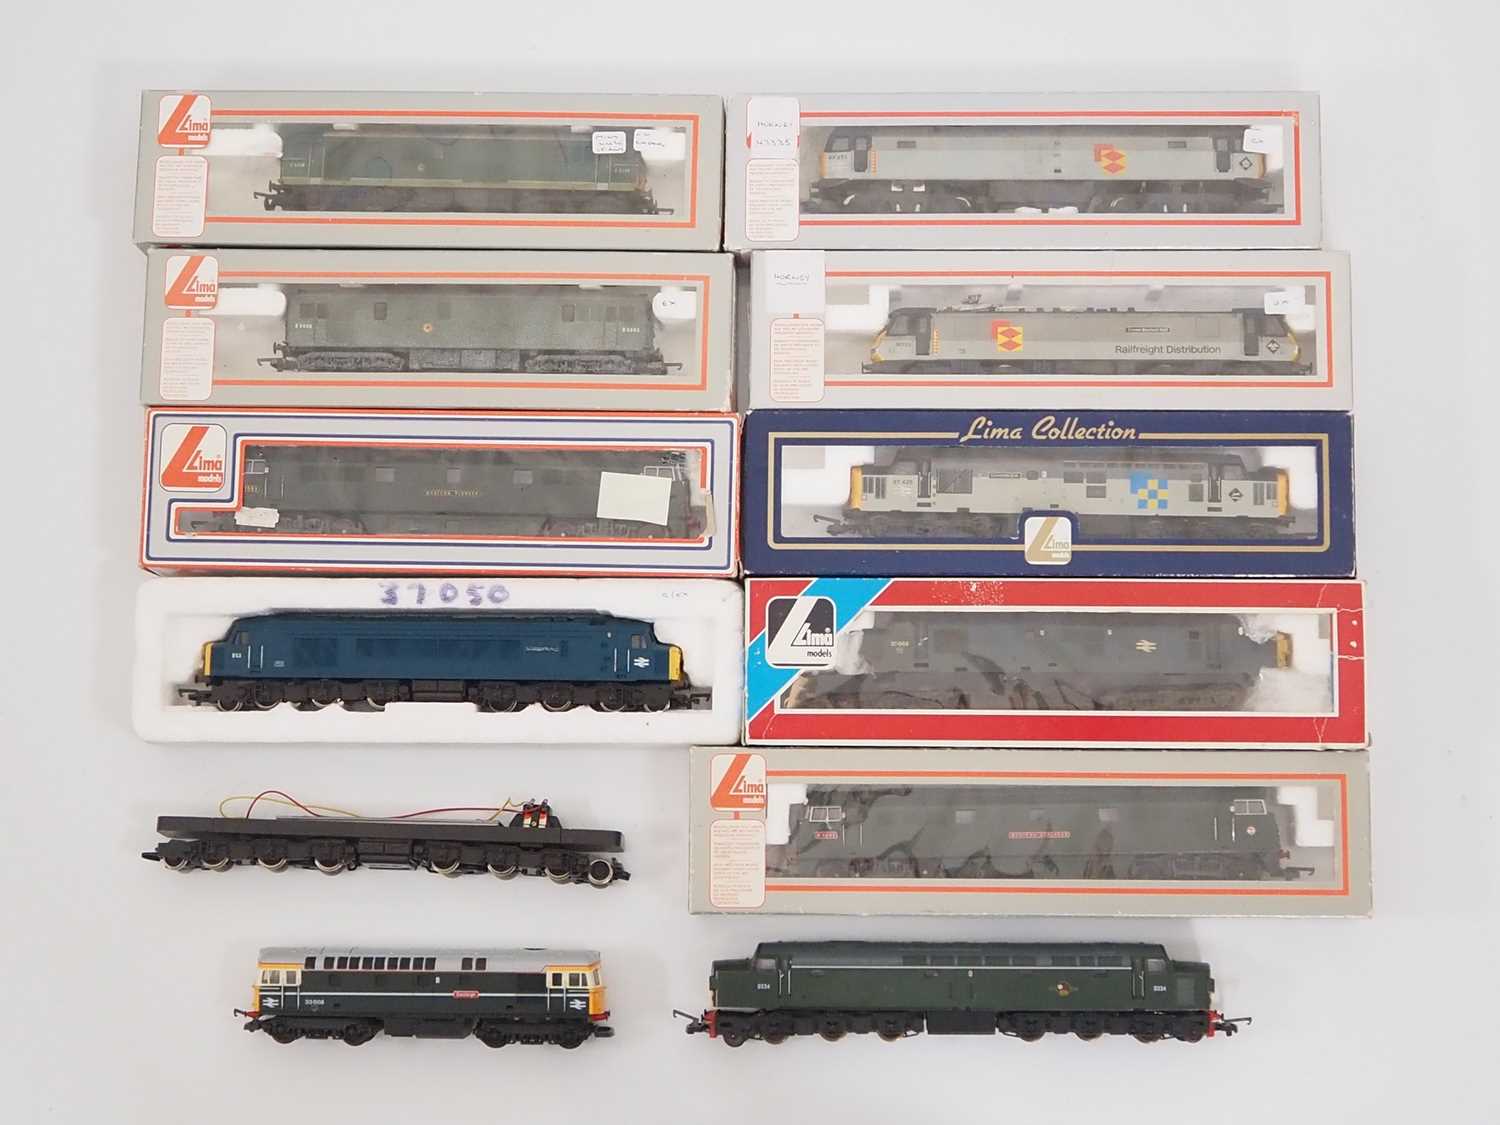 A mixed group of OO gauge diesel locos by various manufacturers all repainted, weathered or in